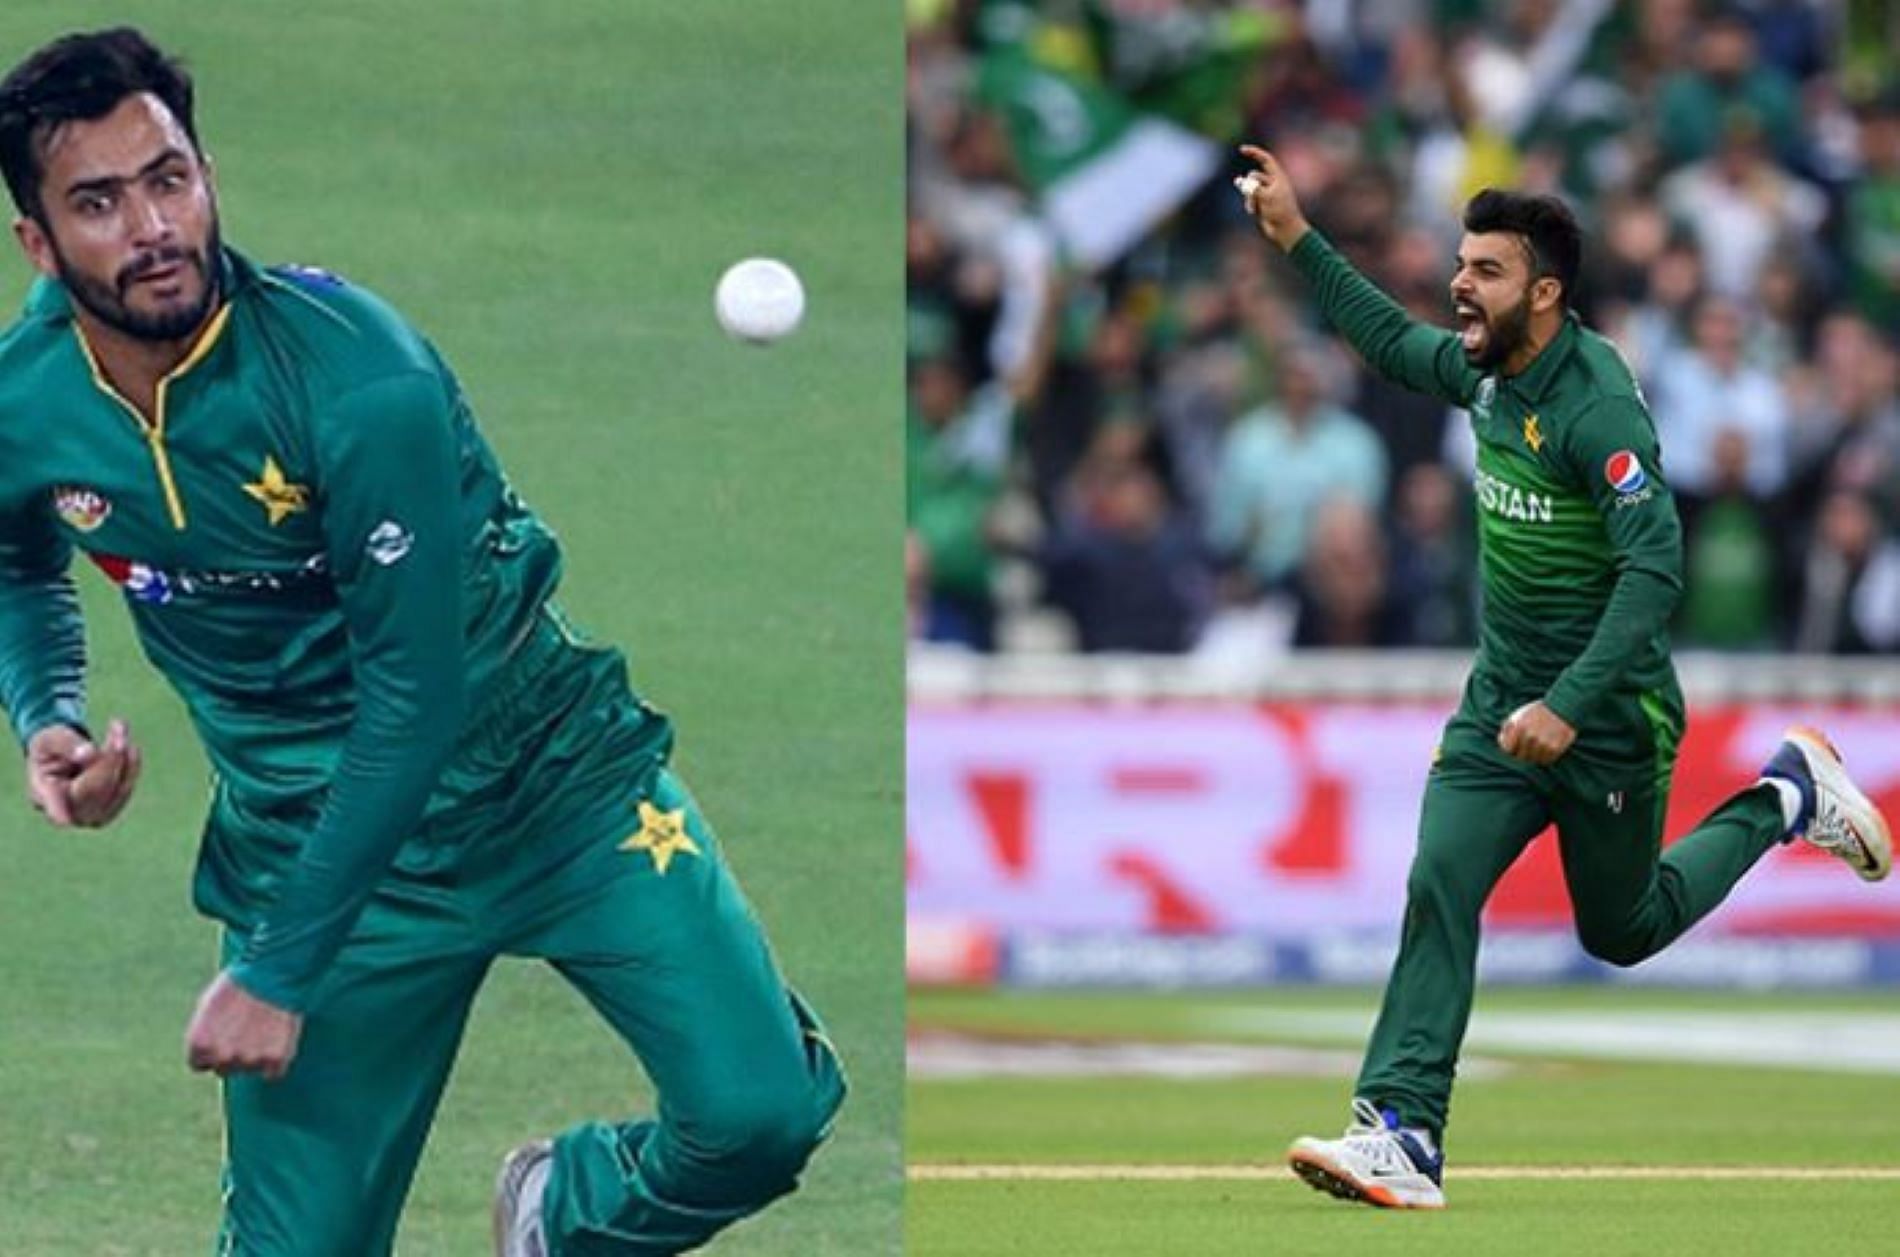 The Pakistan spin-duo had no impact in the Asia Cup.